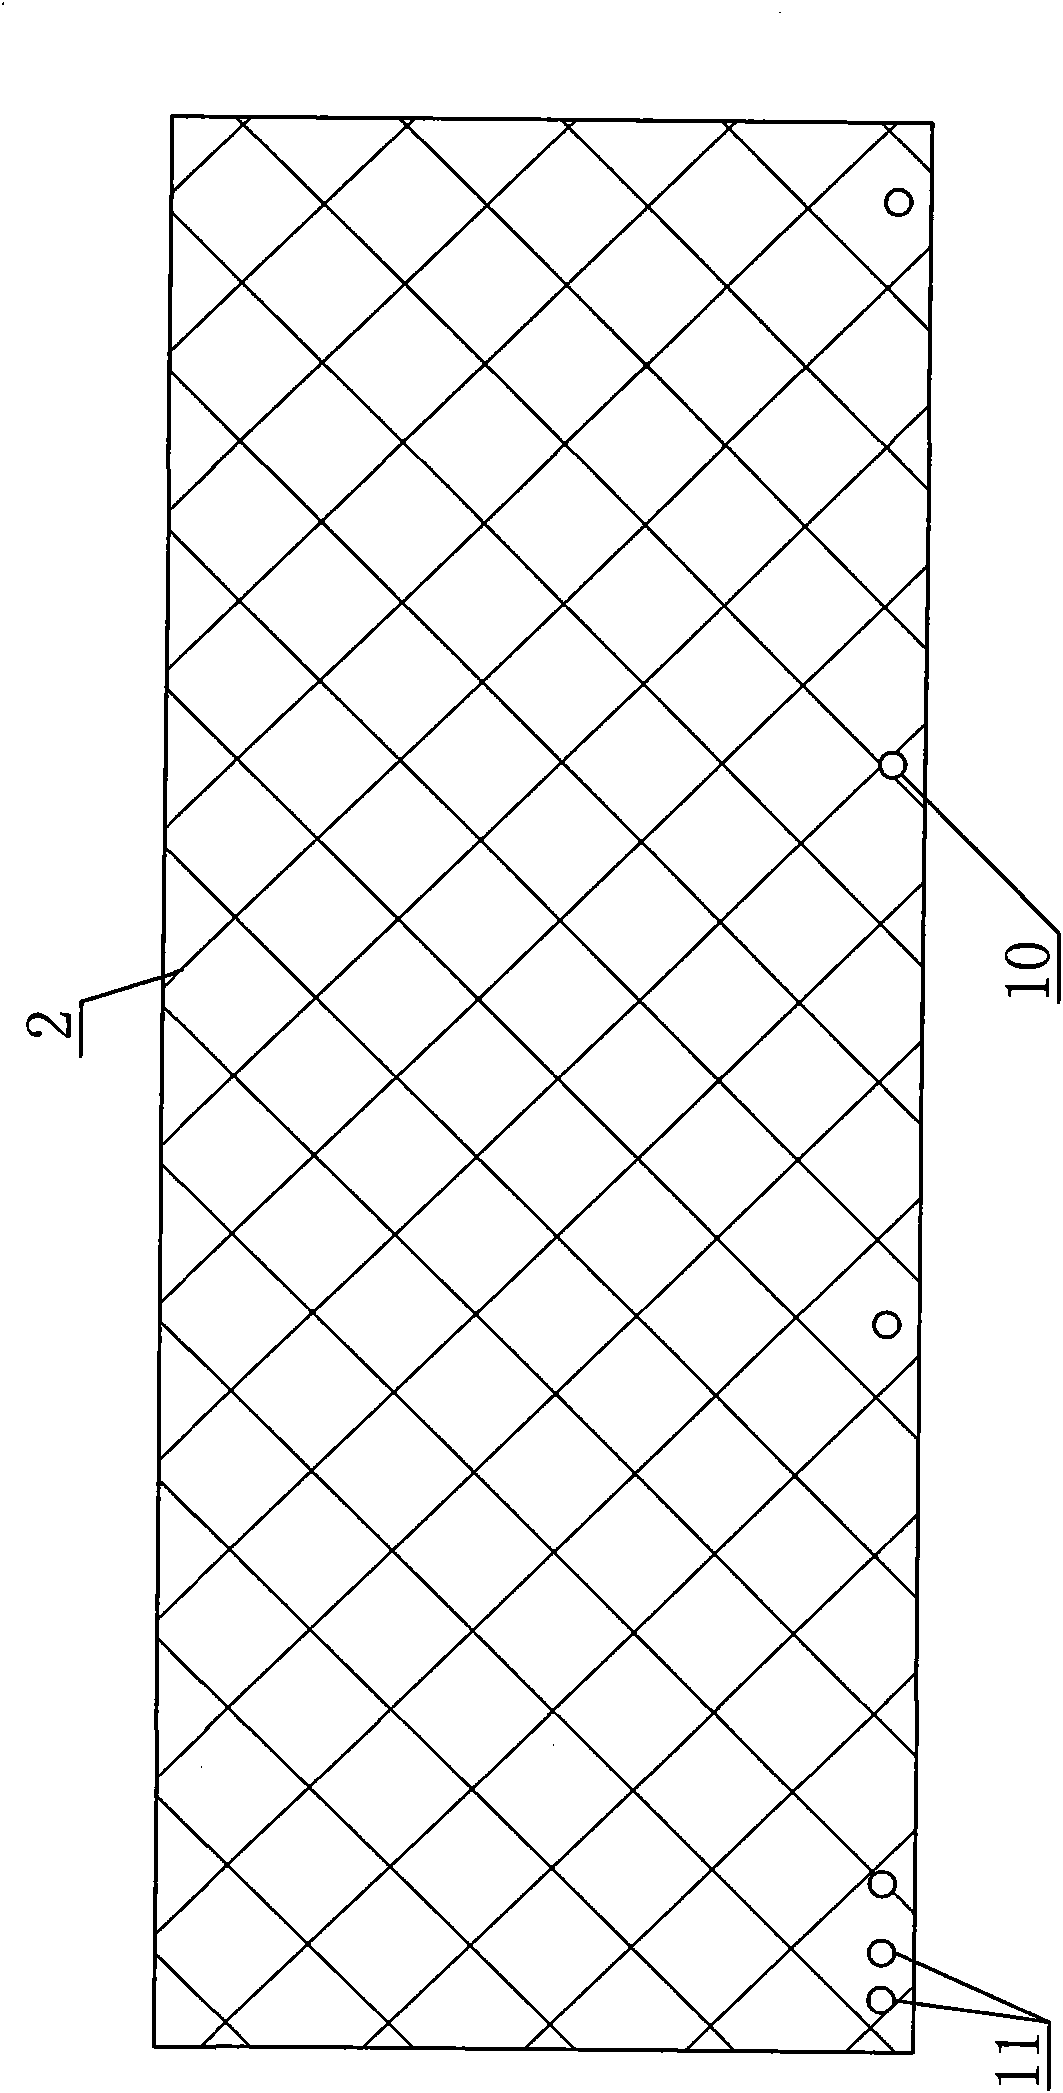 Oil smoke purification filtering device capable of automatically replacing filter belt